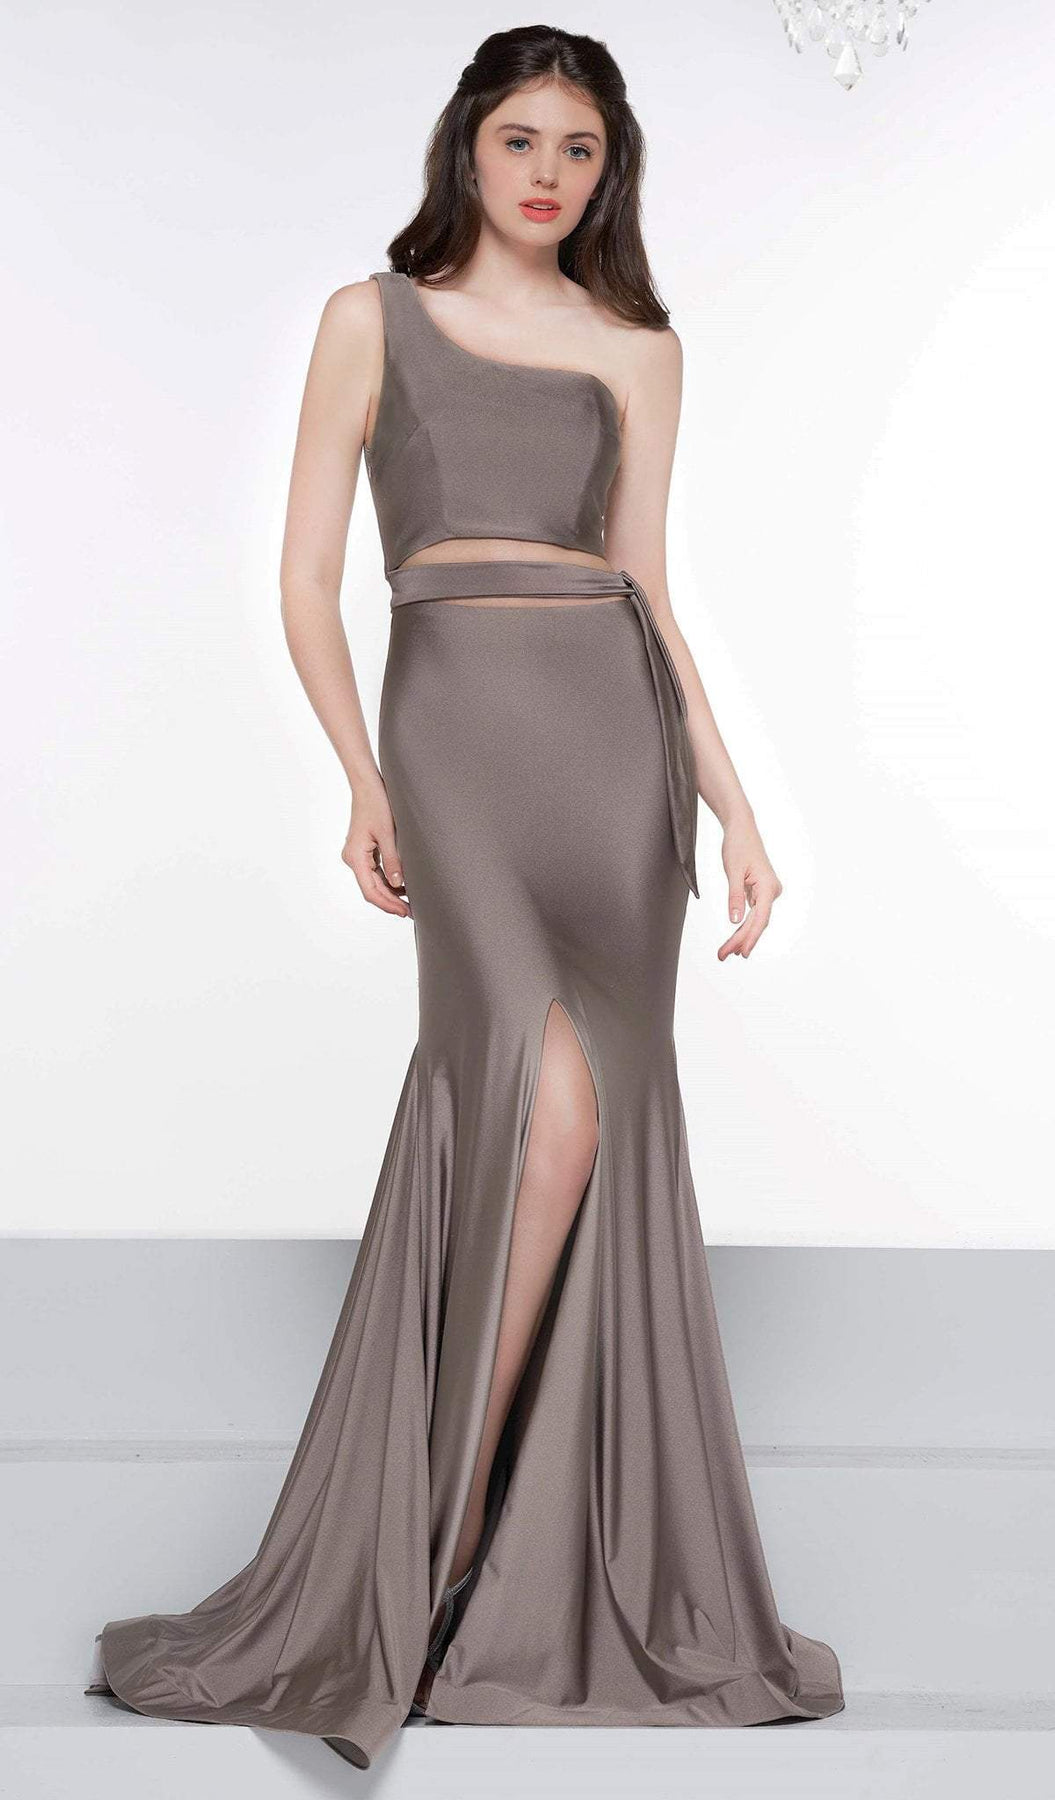 Colors Dress - 2137 Asymmetrical Exposed Midriff High Slit Gown In Brown and Gray